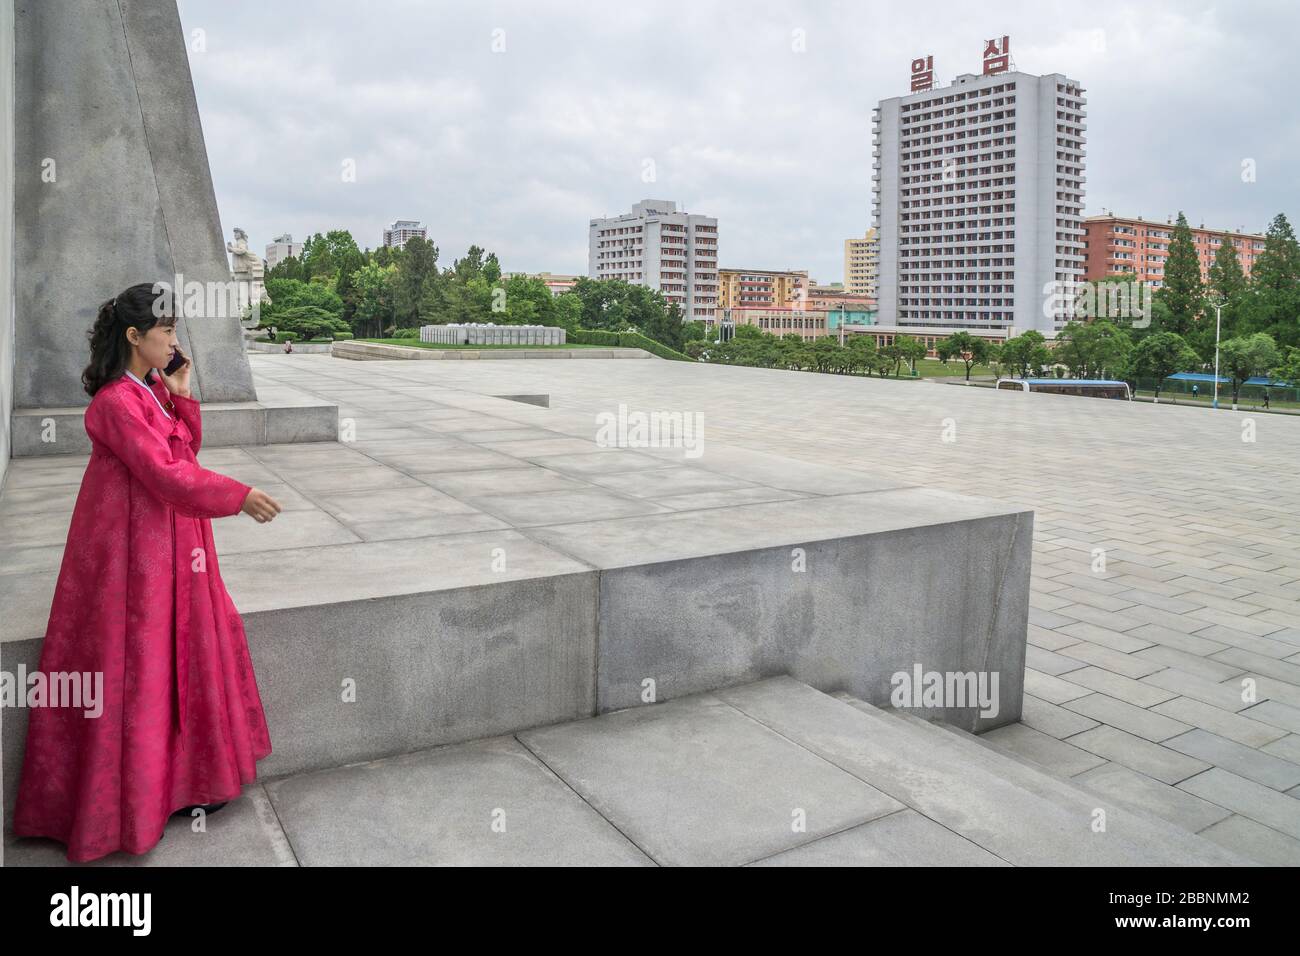 A North Korean woman wearing a traditional dress is seen at the pedestal of the Tower of Juche, Pyongyang, North Korea Stock Photo